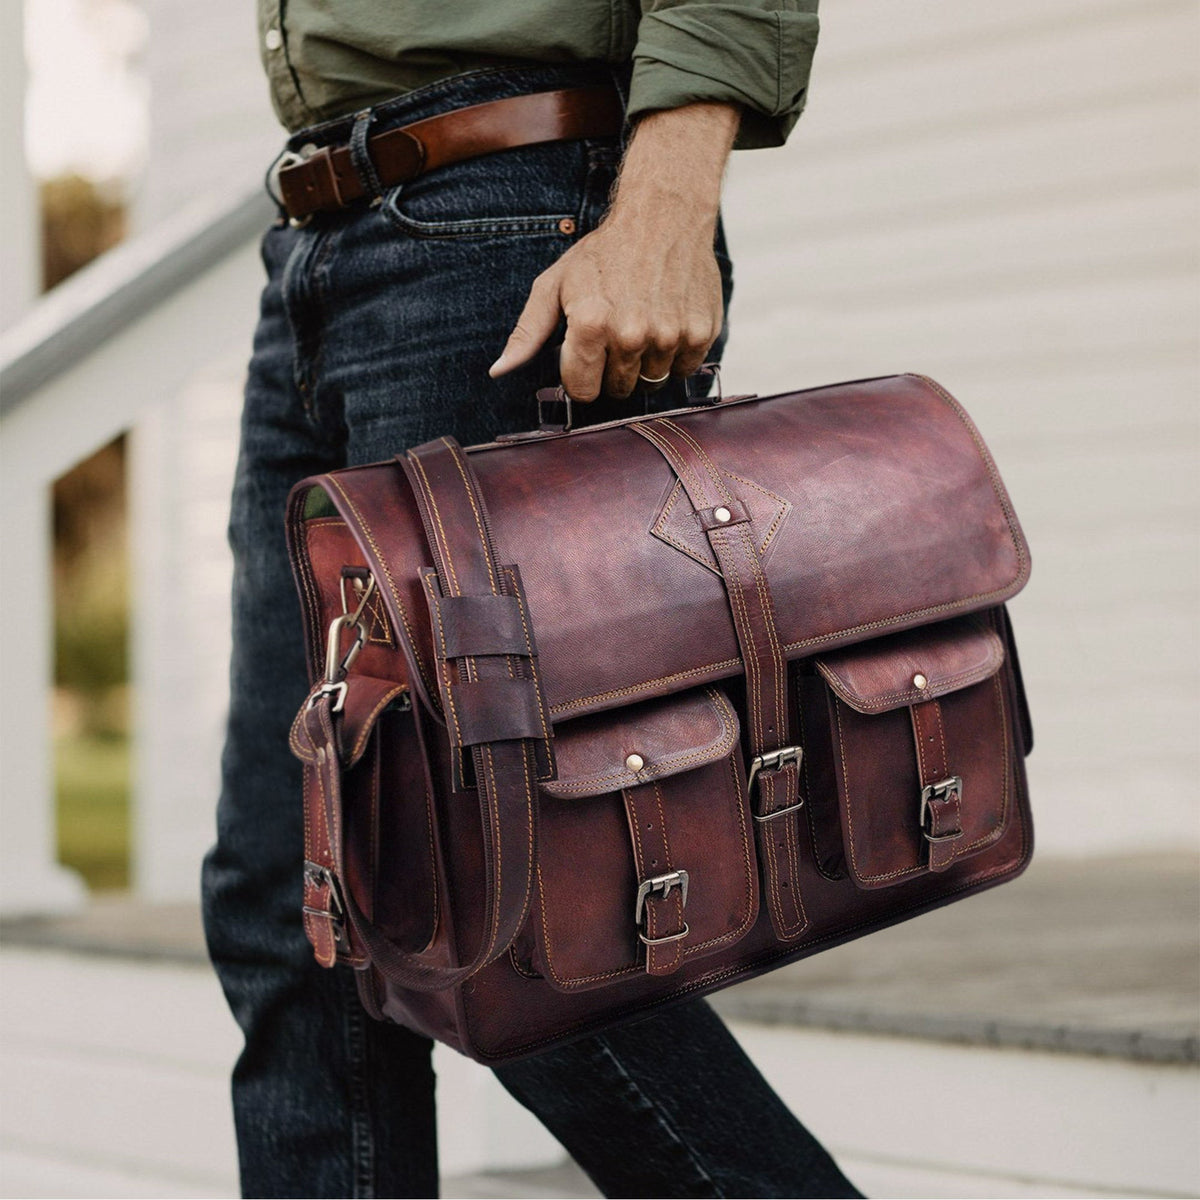 Why Leather Messenger Bags Are The Talk Of The Town — Classy Leather Bags